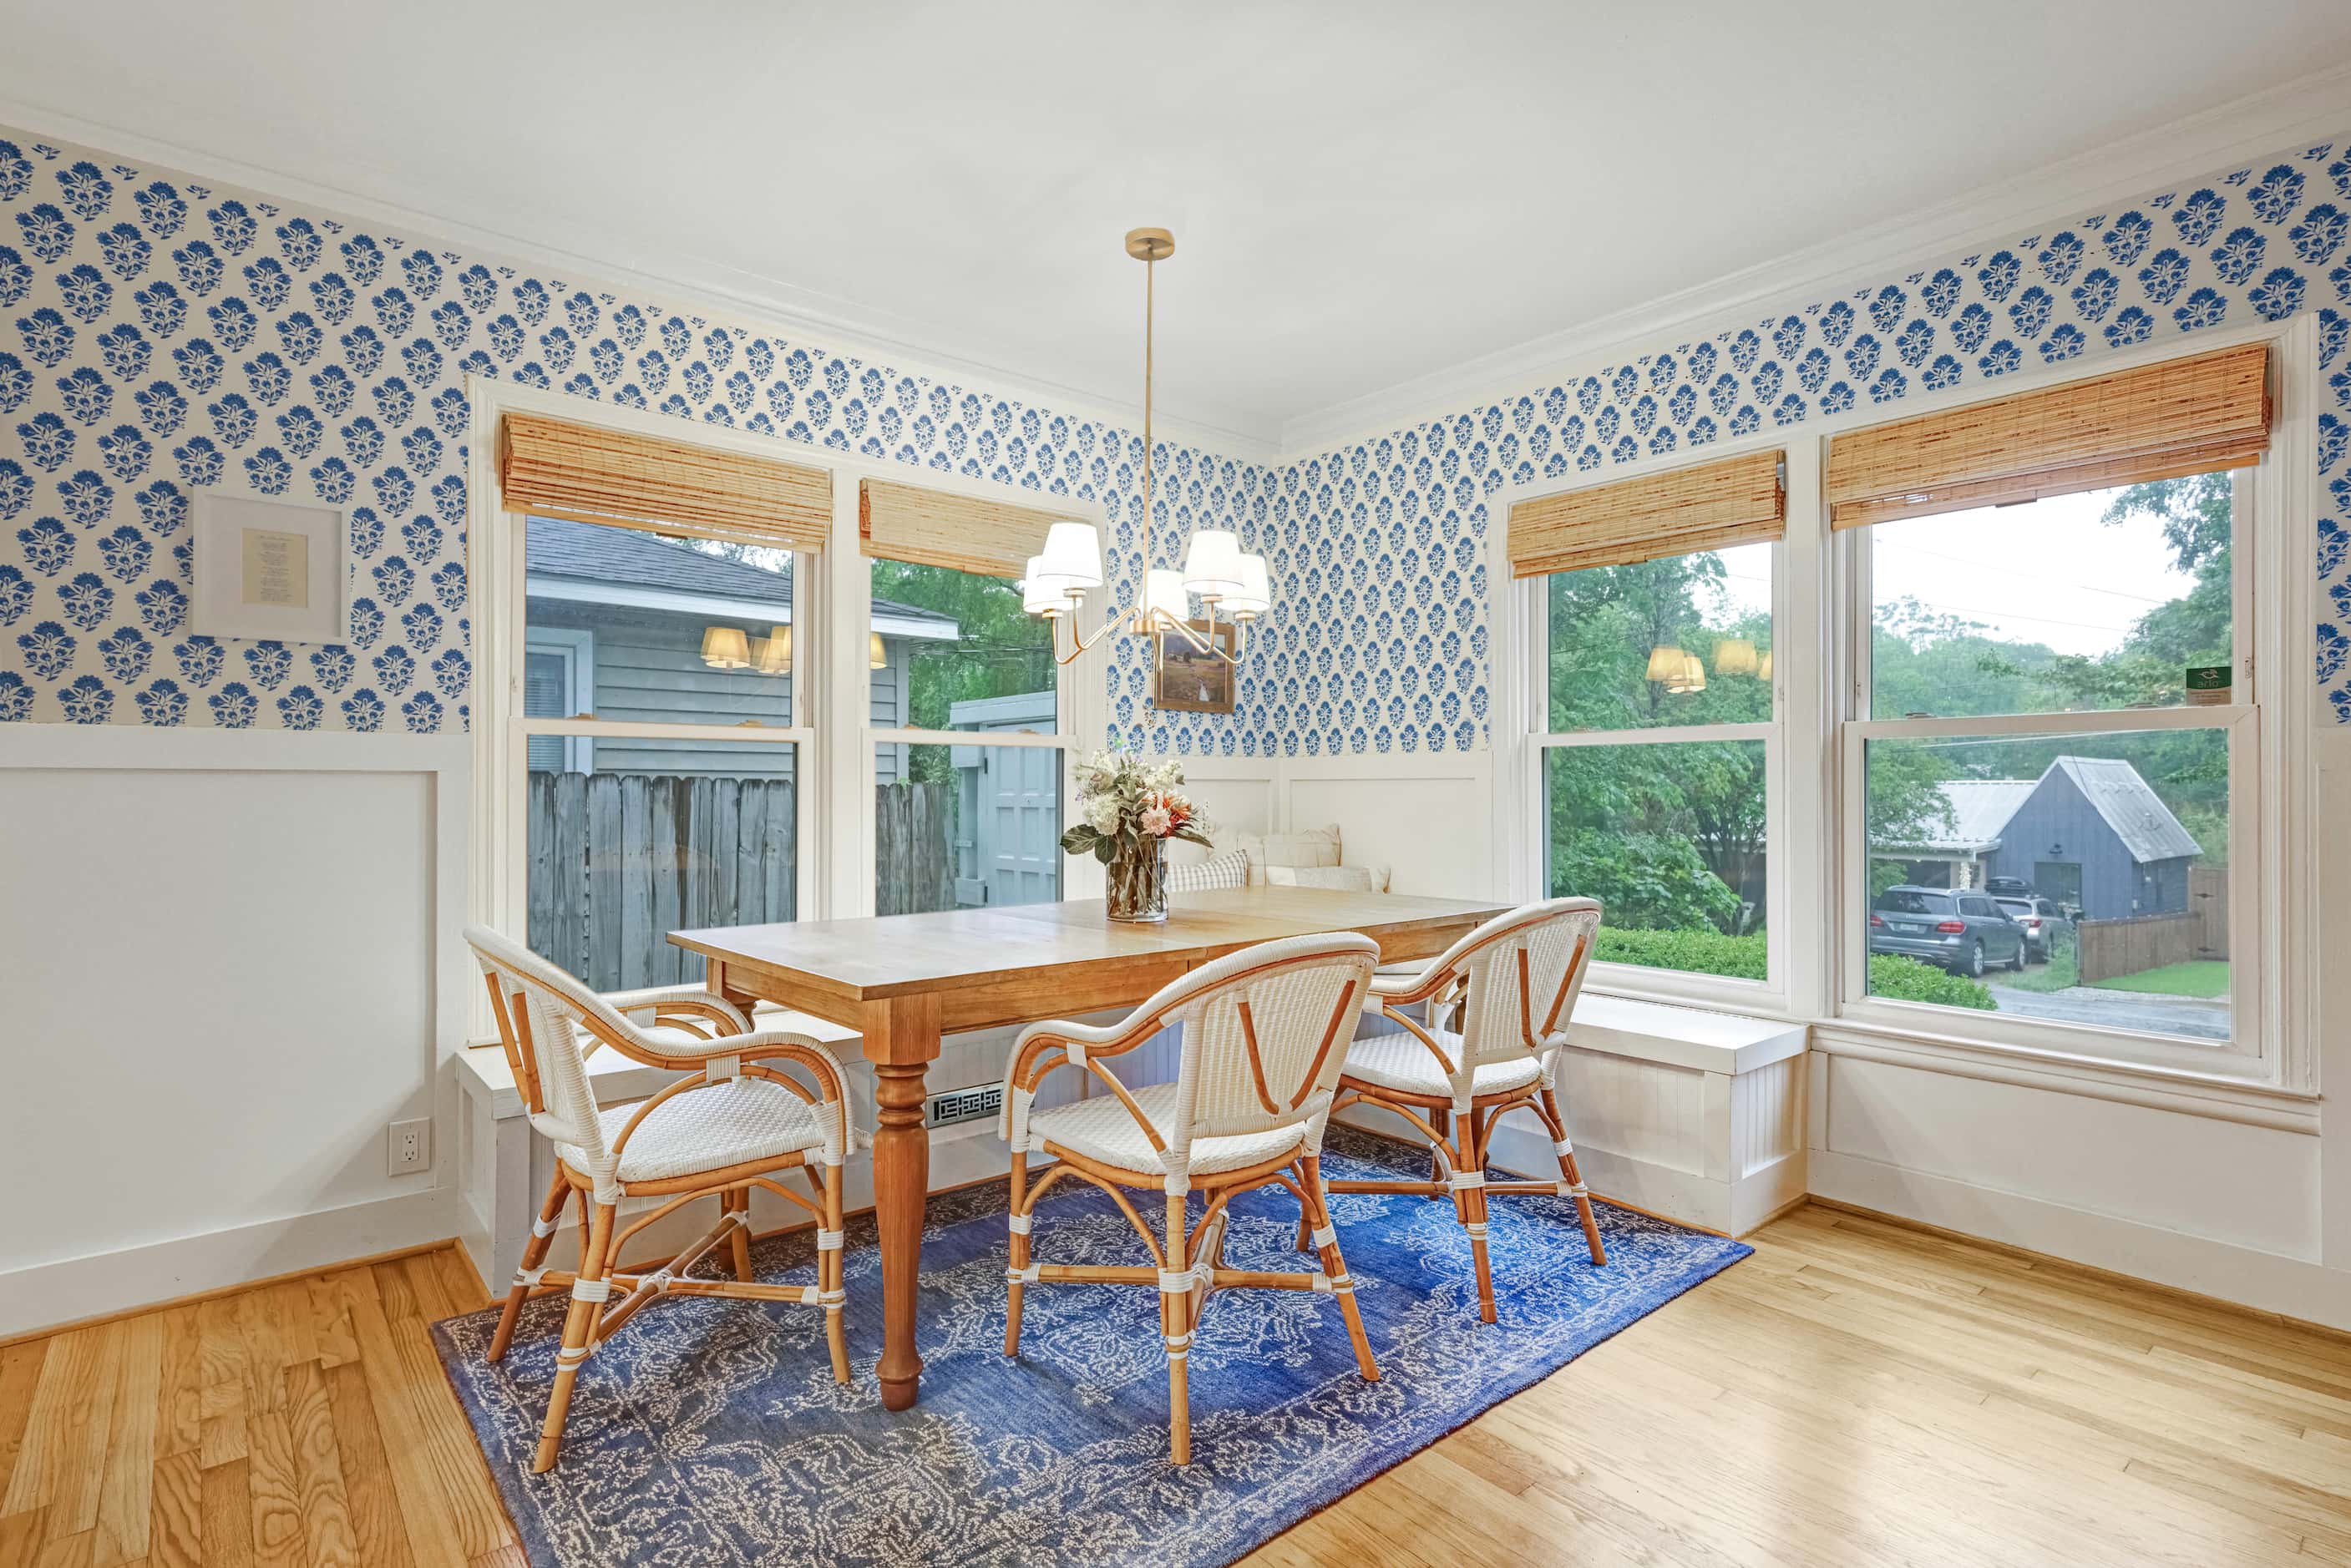 Blue and white wallpaper in the dining room adds a pop of color.